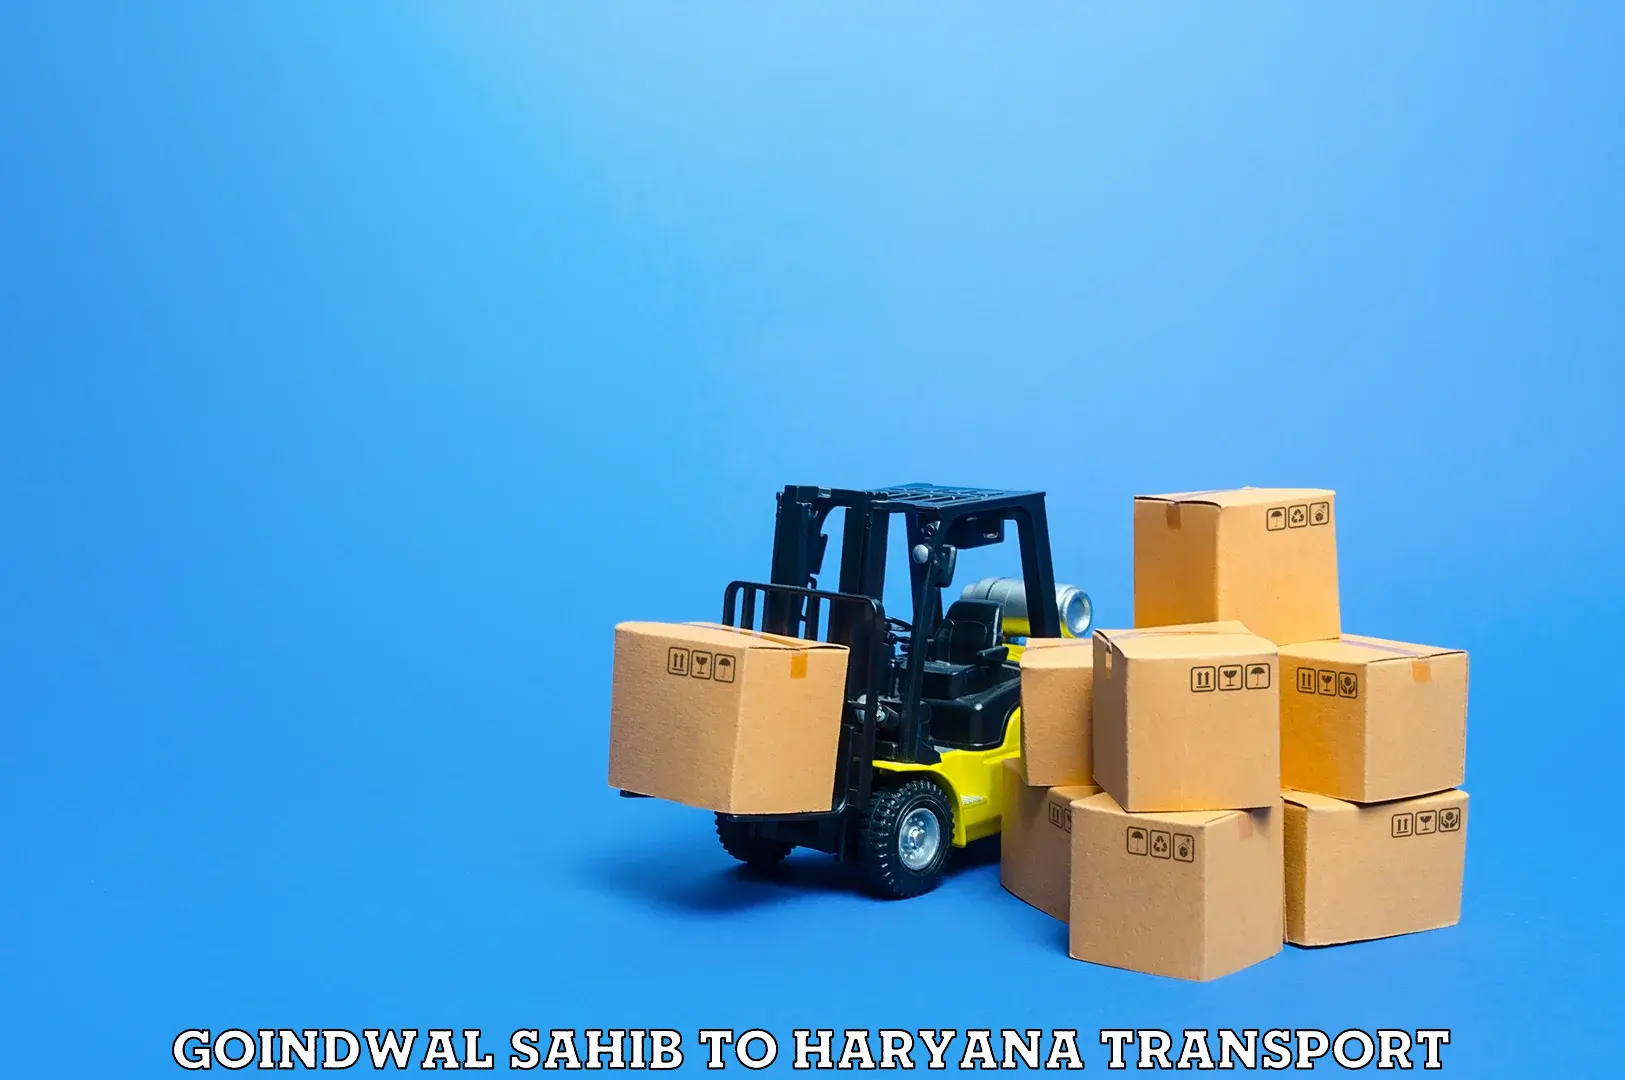 Delivery service Goindwal Sahib to Pinjore